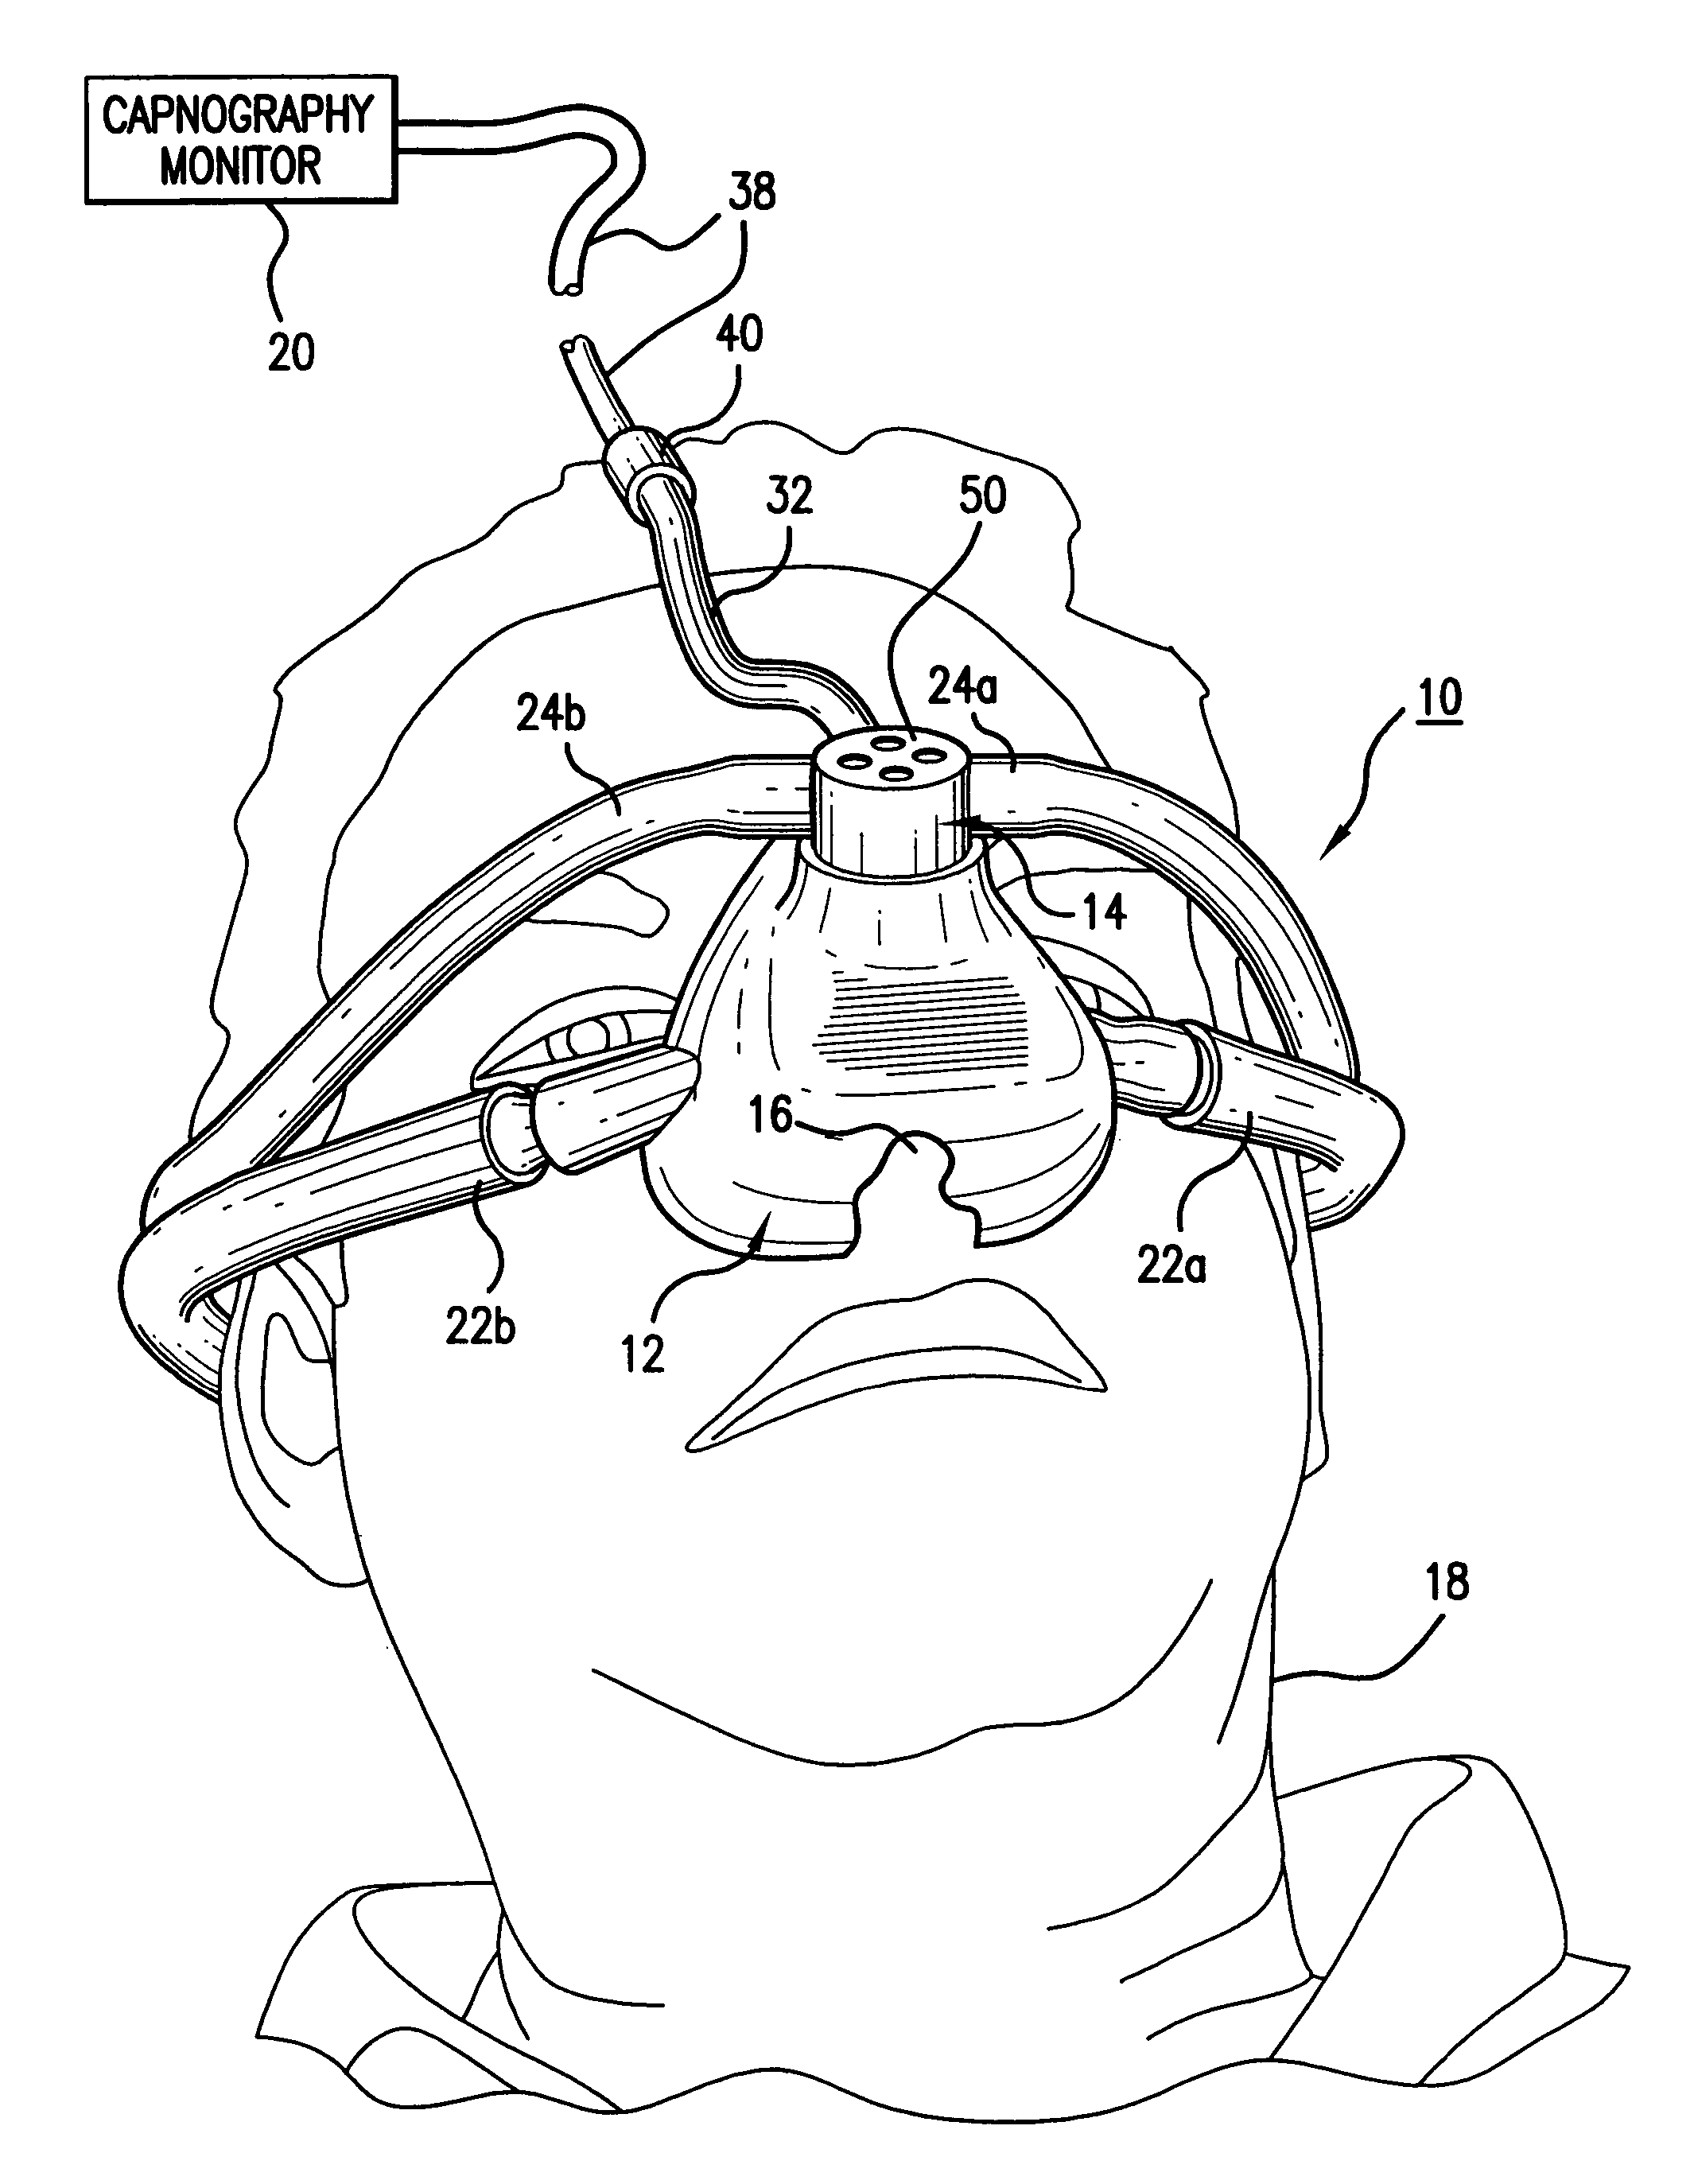 Capnography measurement adapter and airway mask system